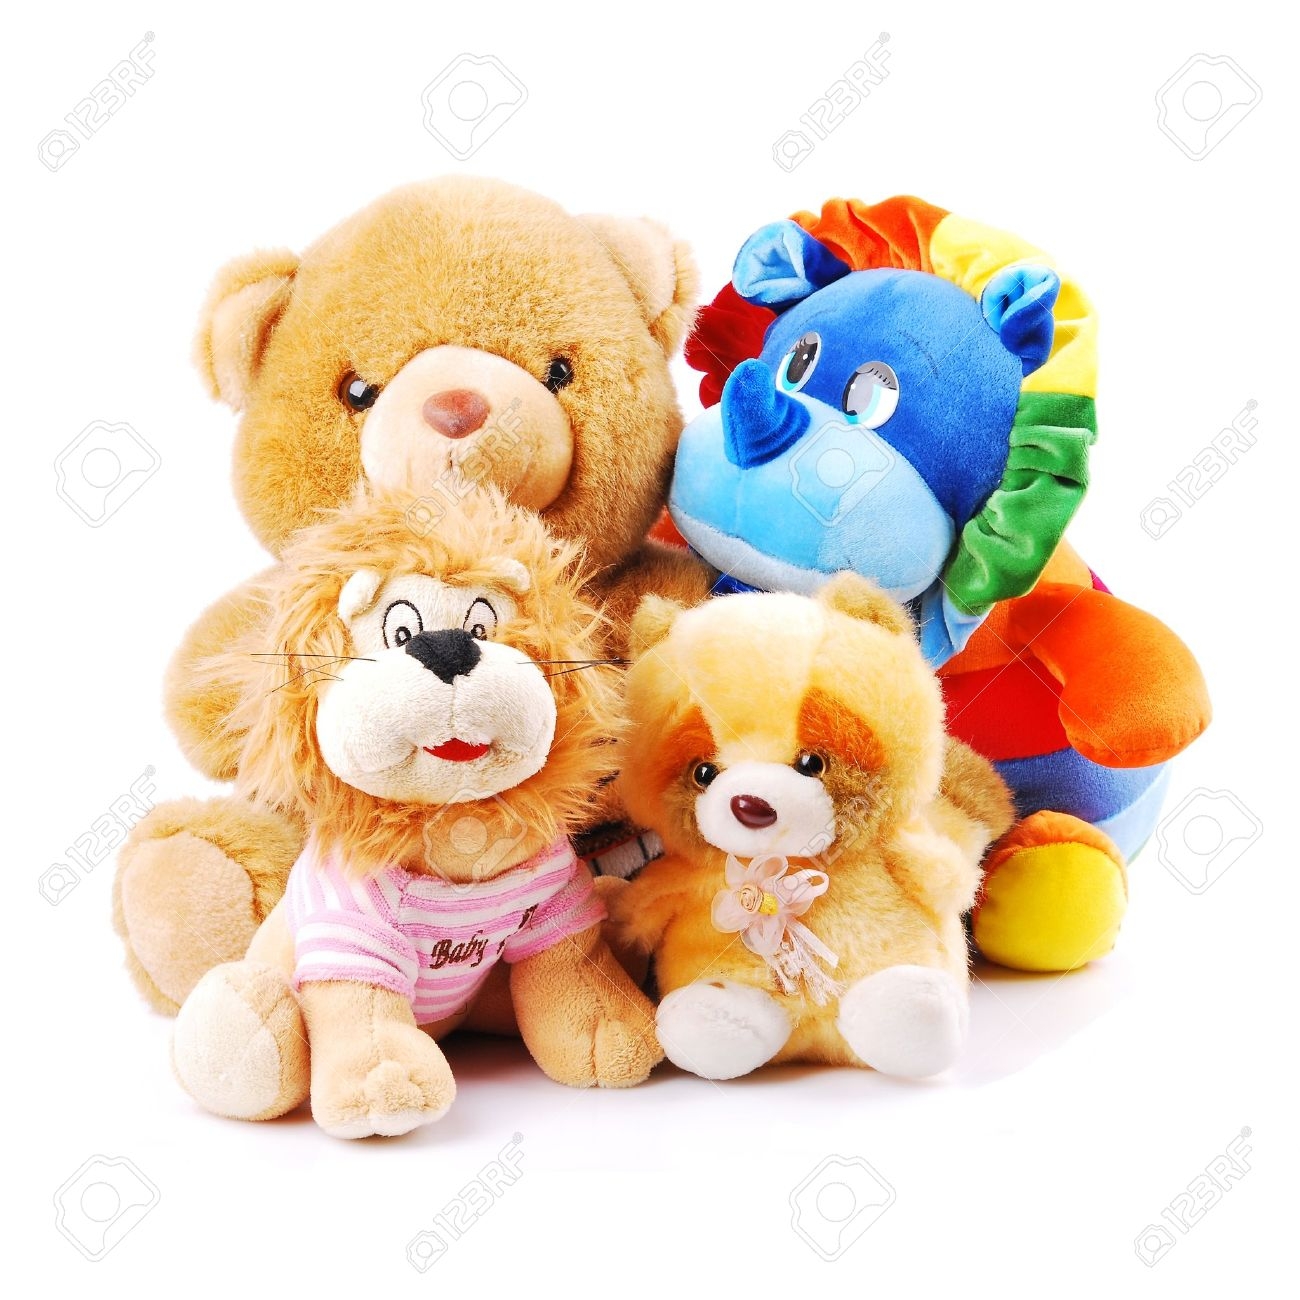 Stuffed Animal Clipart favorite toy 26.